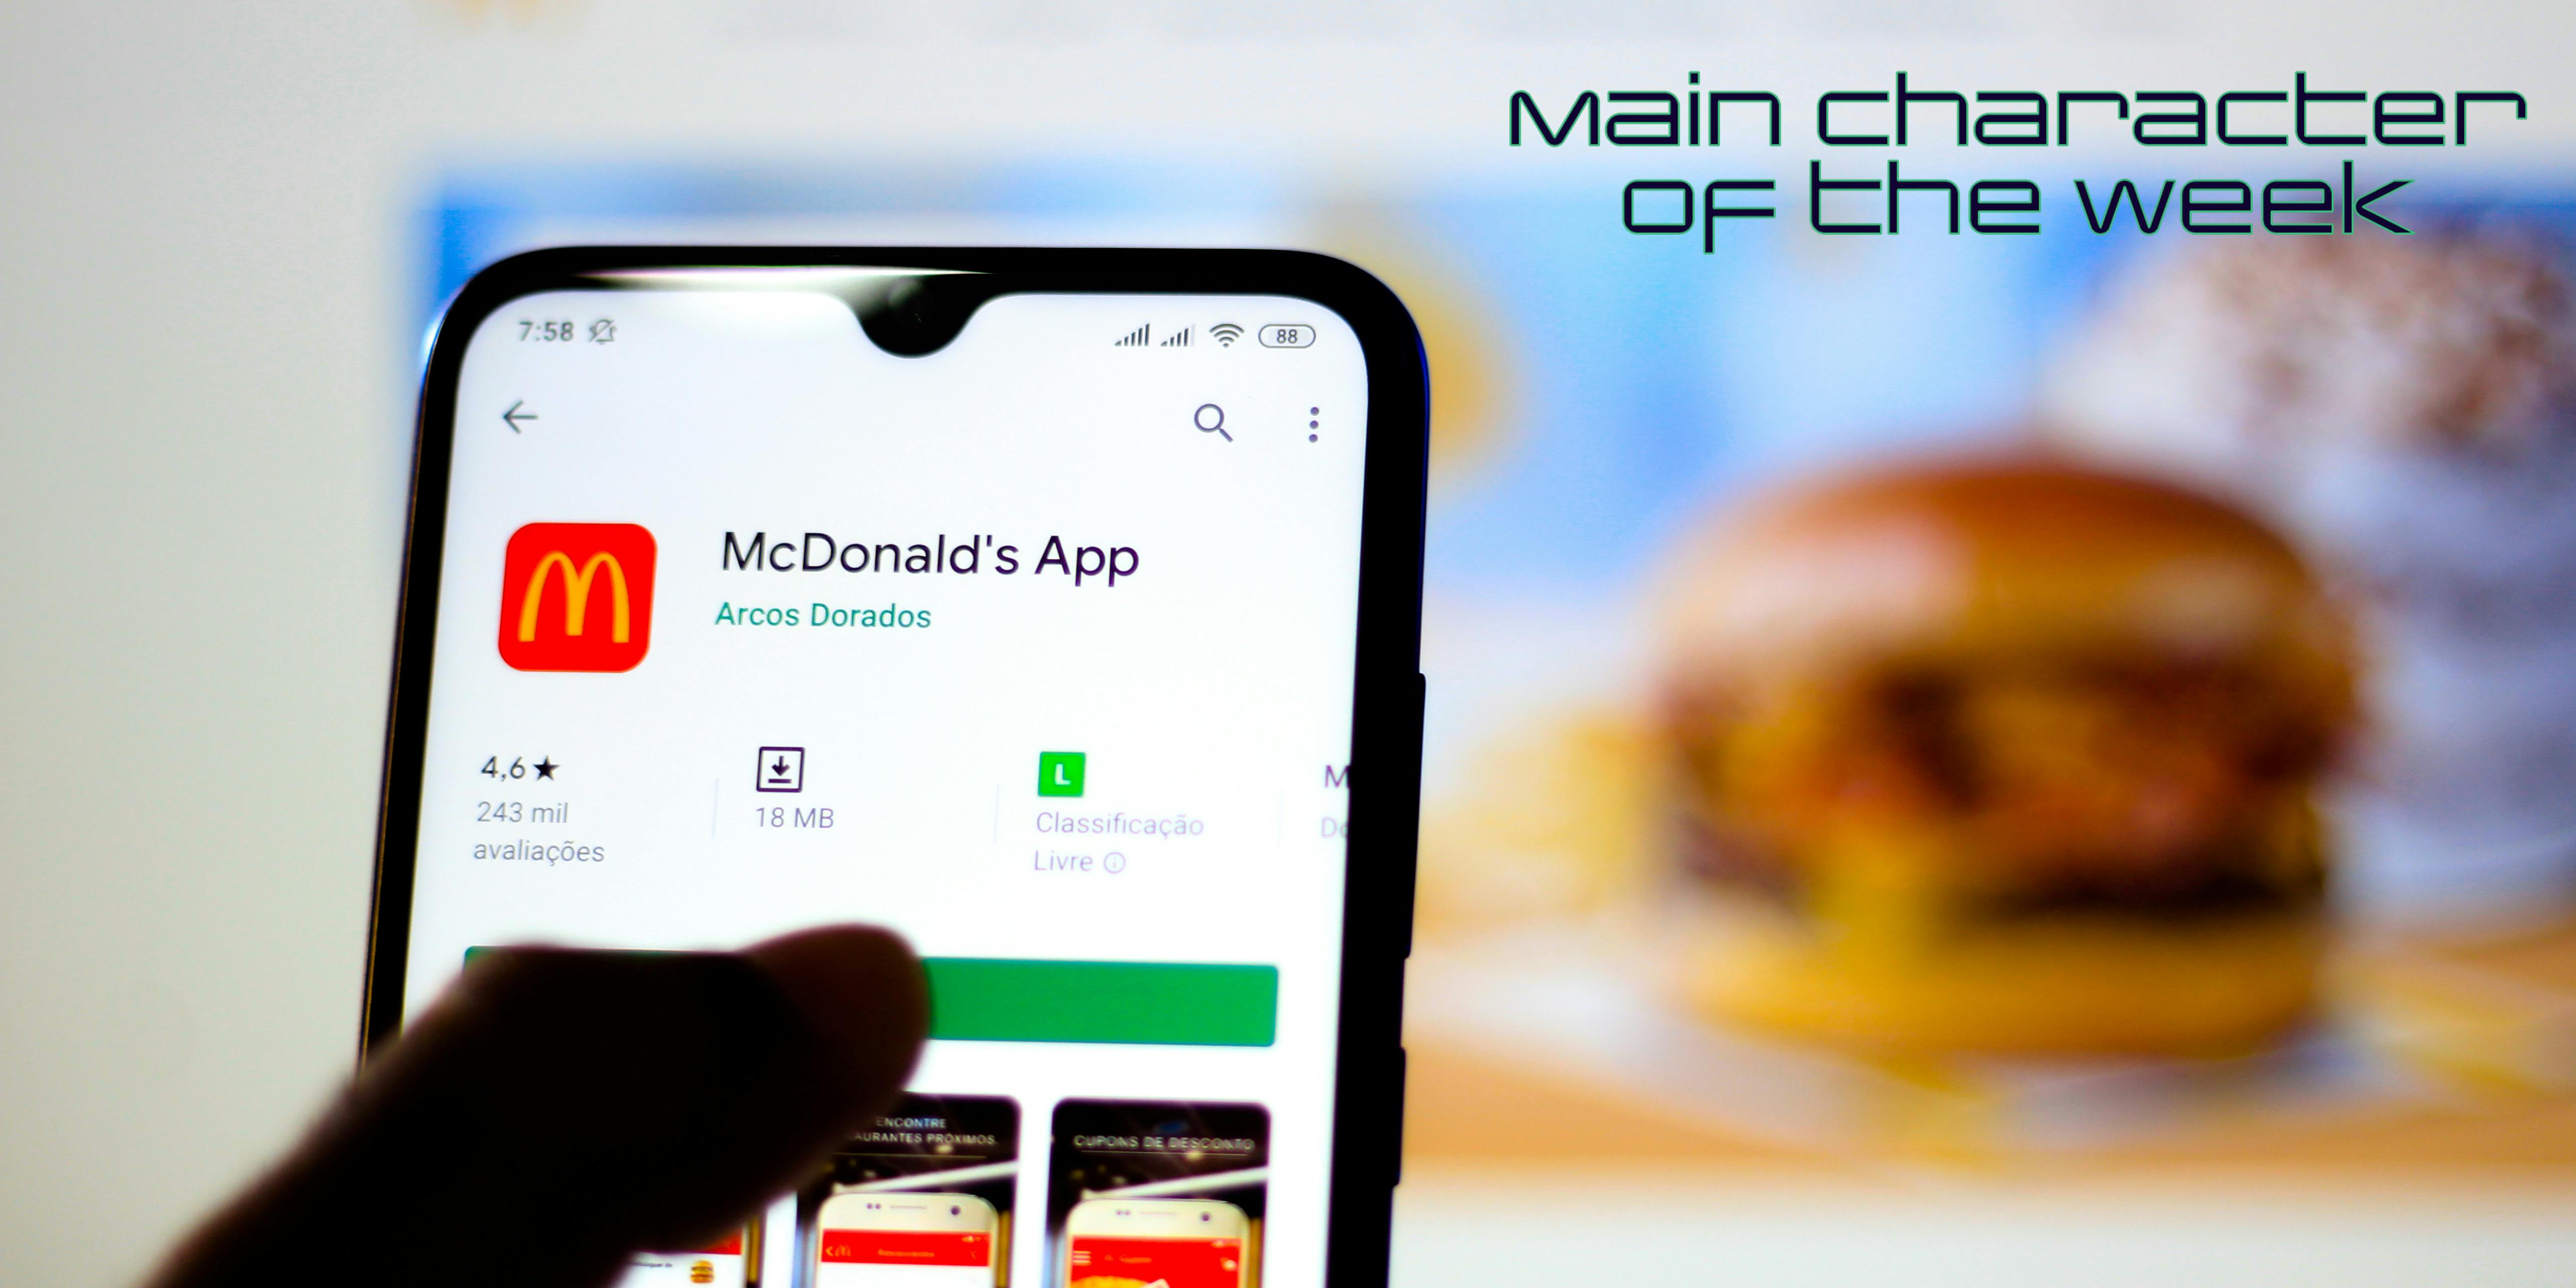 A McDonald's app on a phone. There is text that says 'Main Character of the Week' in a web_crawlr font.